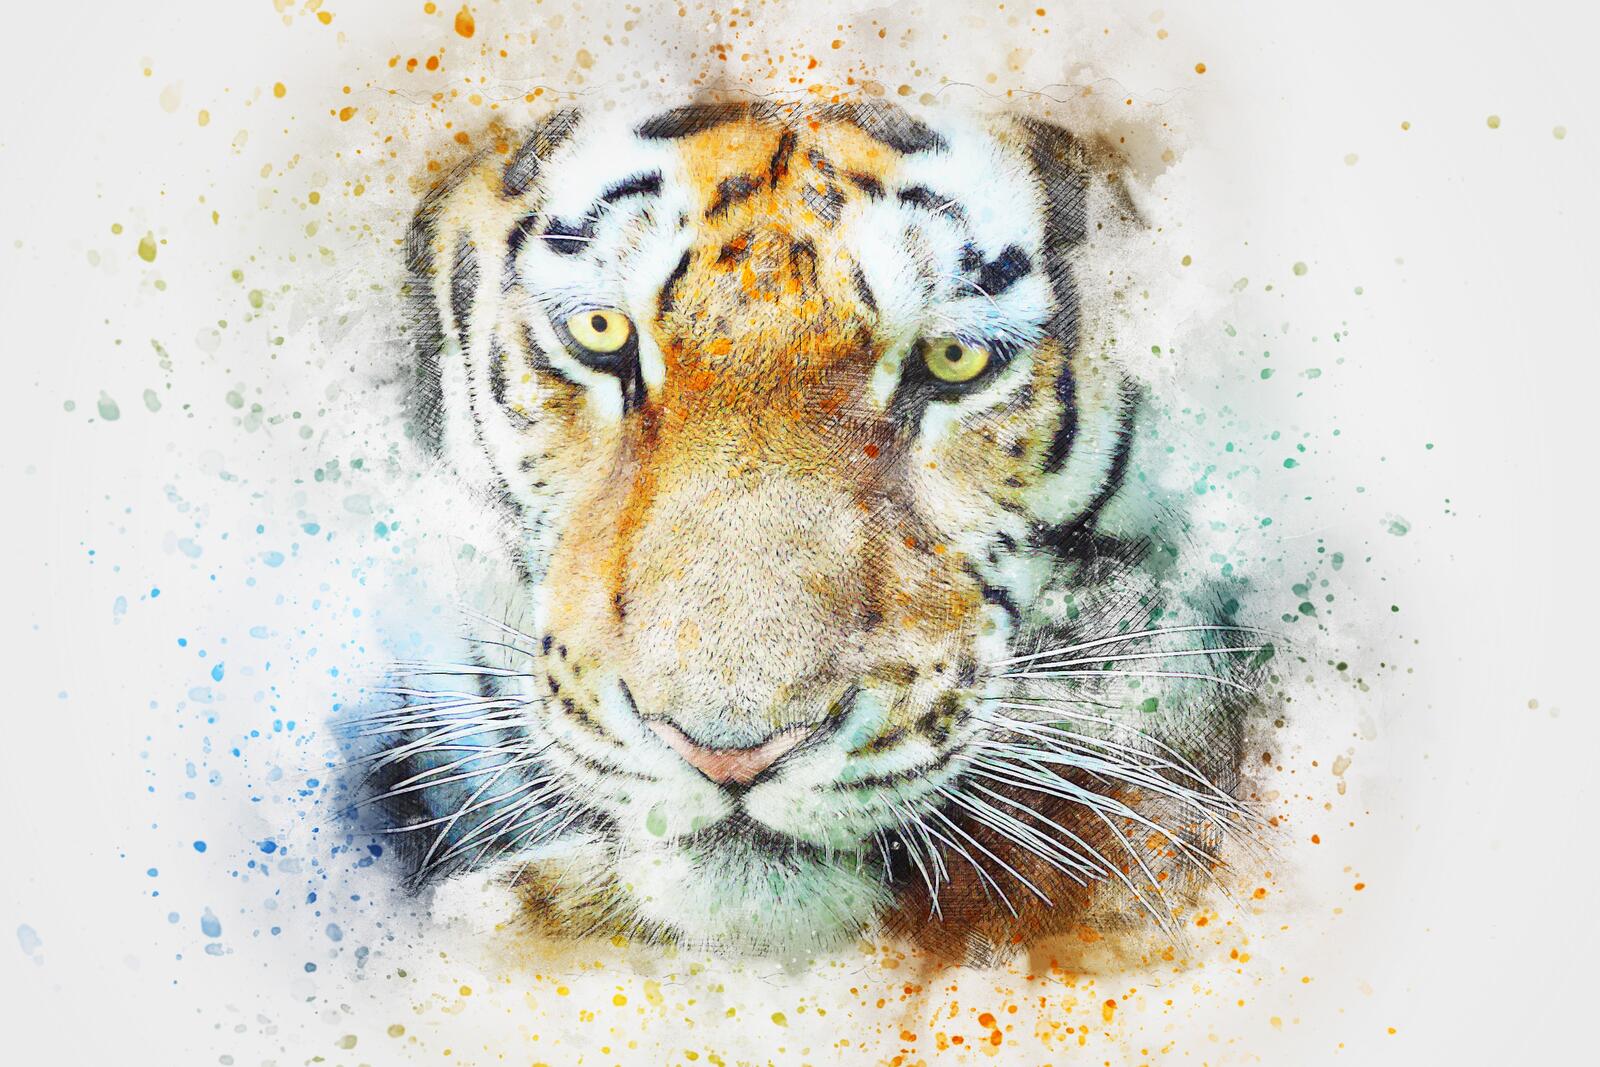 Wallpapers art tiger view on the desktop